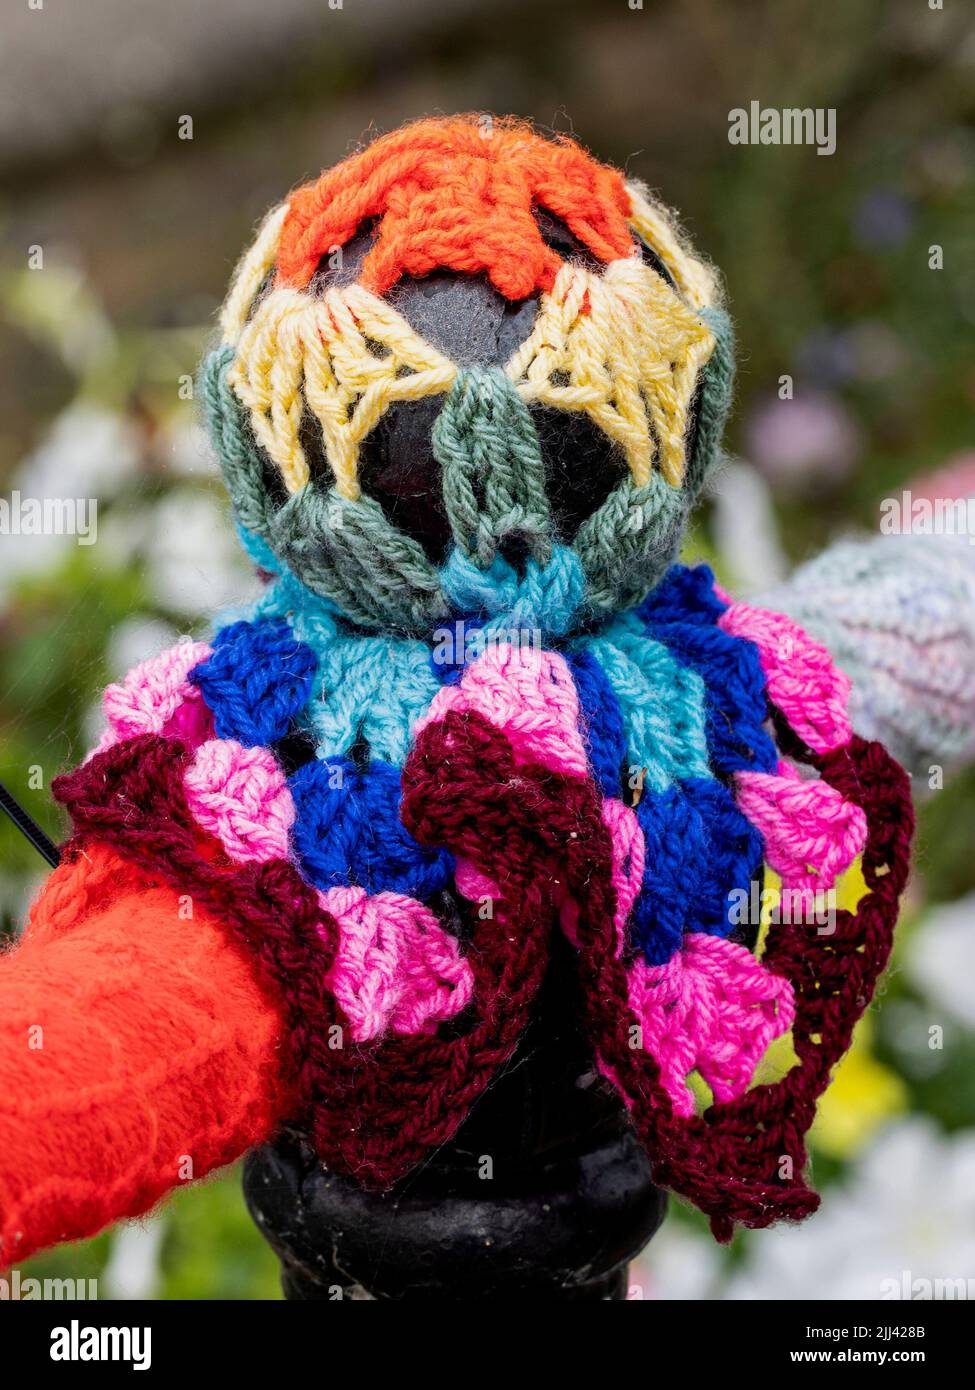 Yarn bombing - St Ives, Cambs Stock Photo